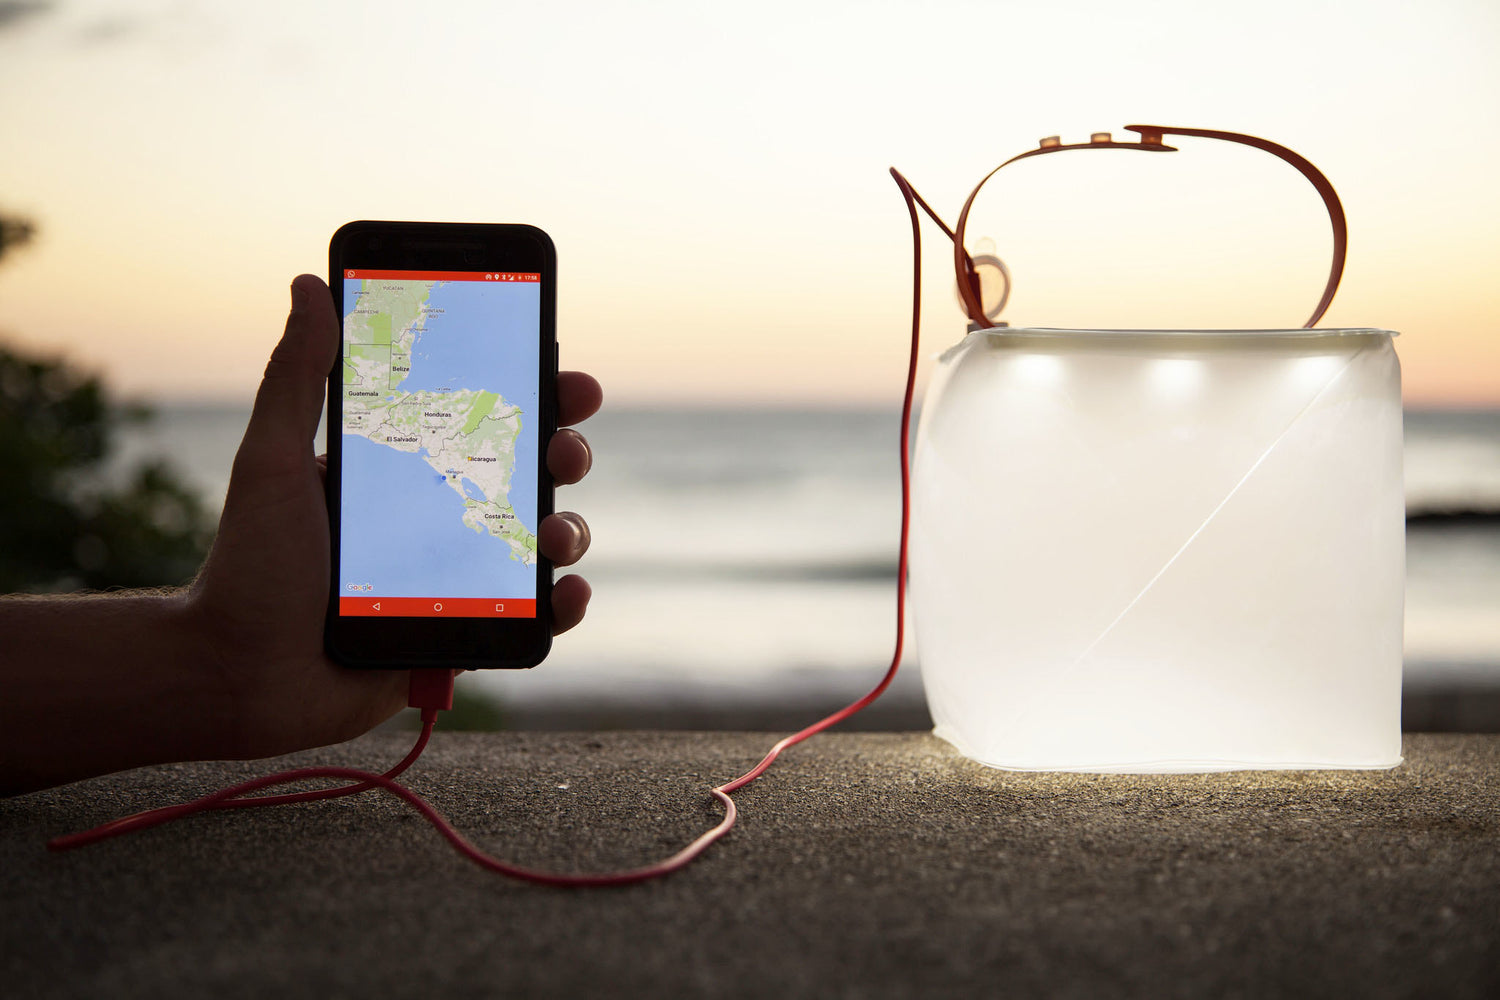 LuminAID Completes and Exceeds Kickstarter Goal for New Phone-Charging Gear